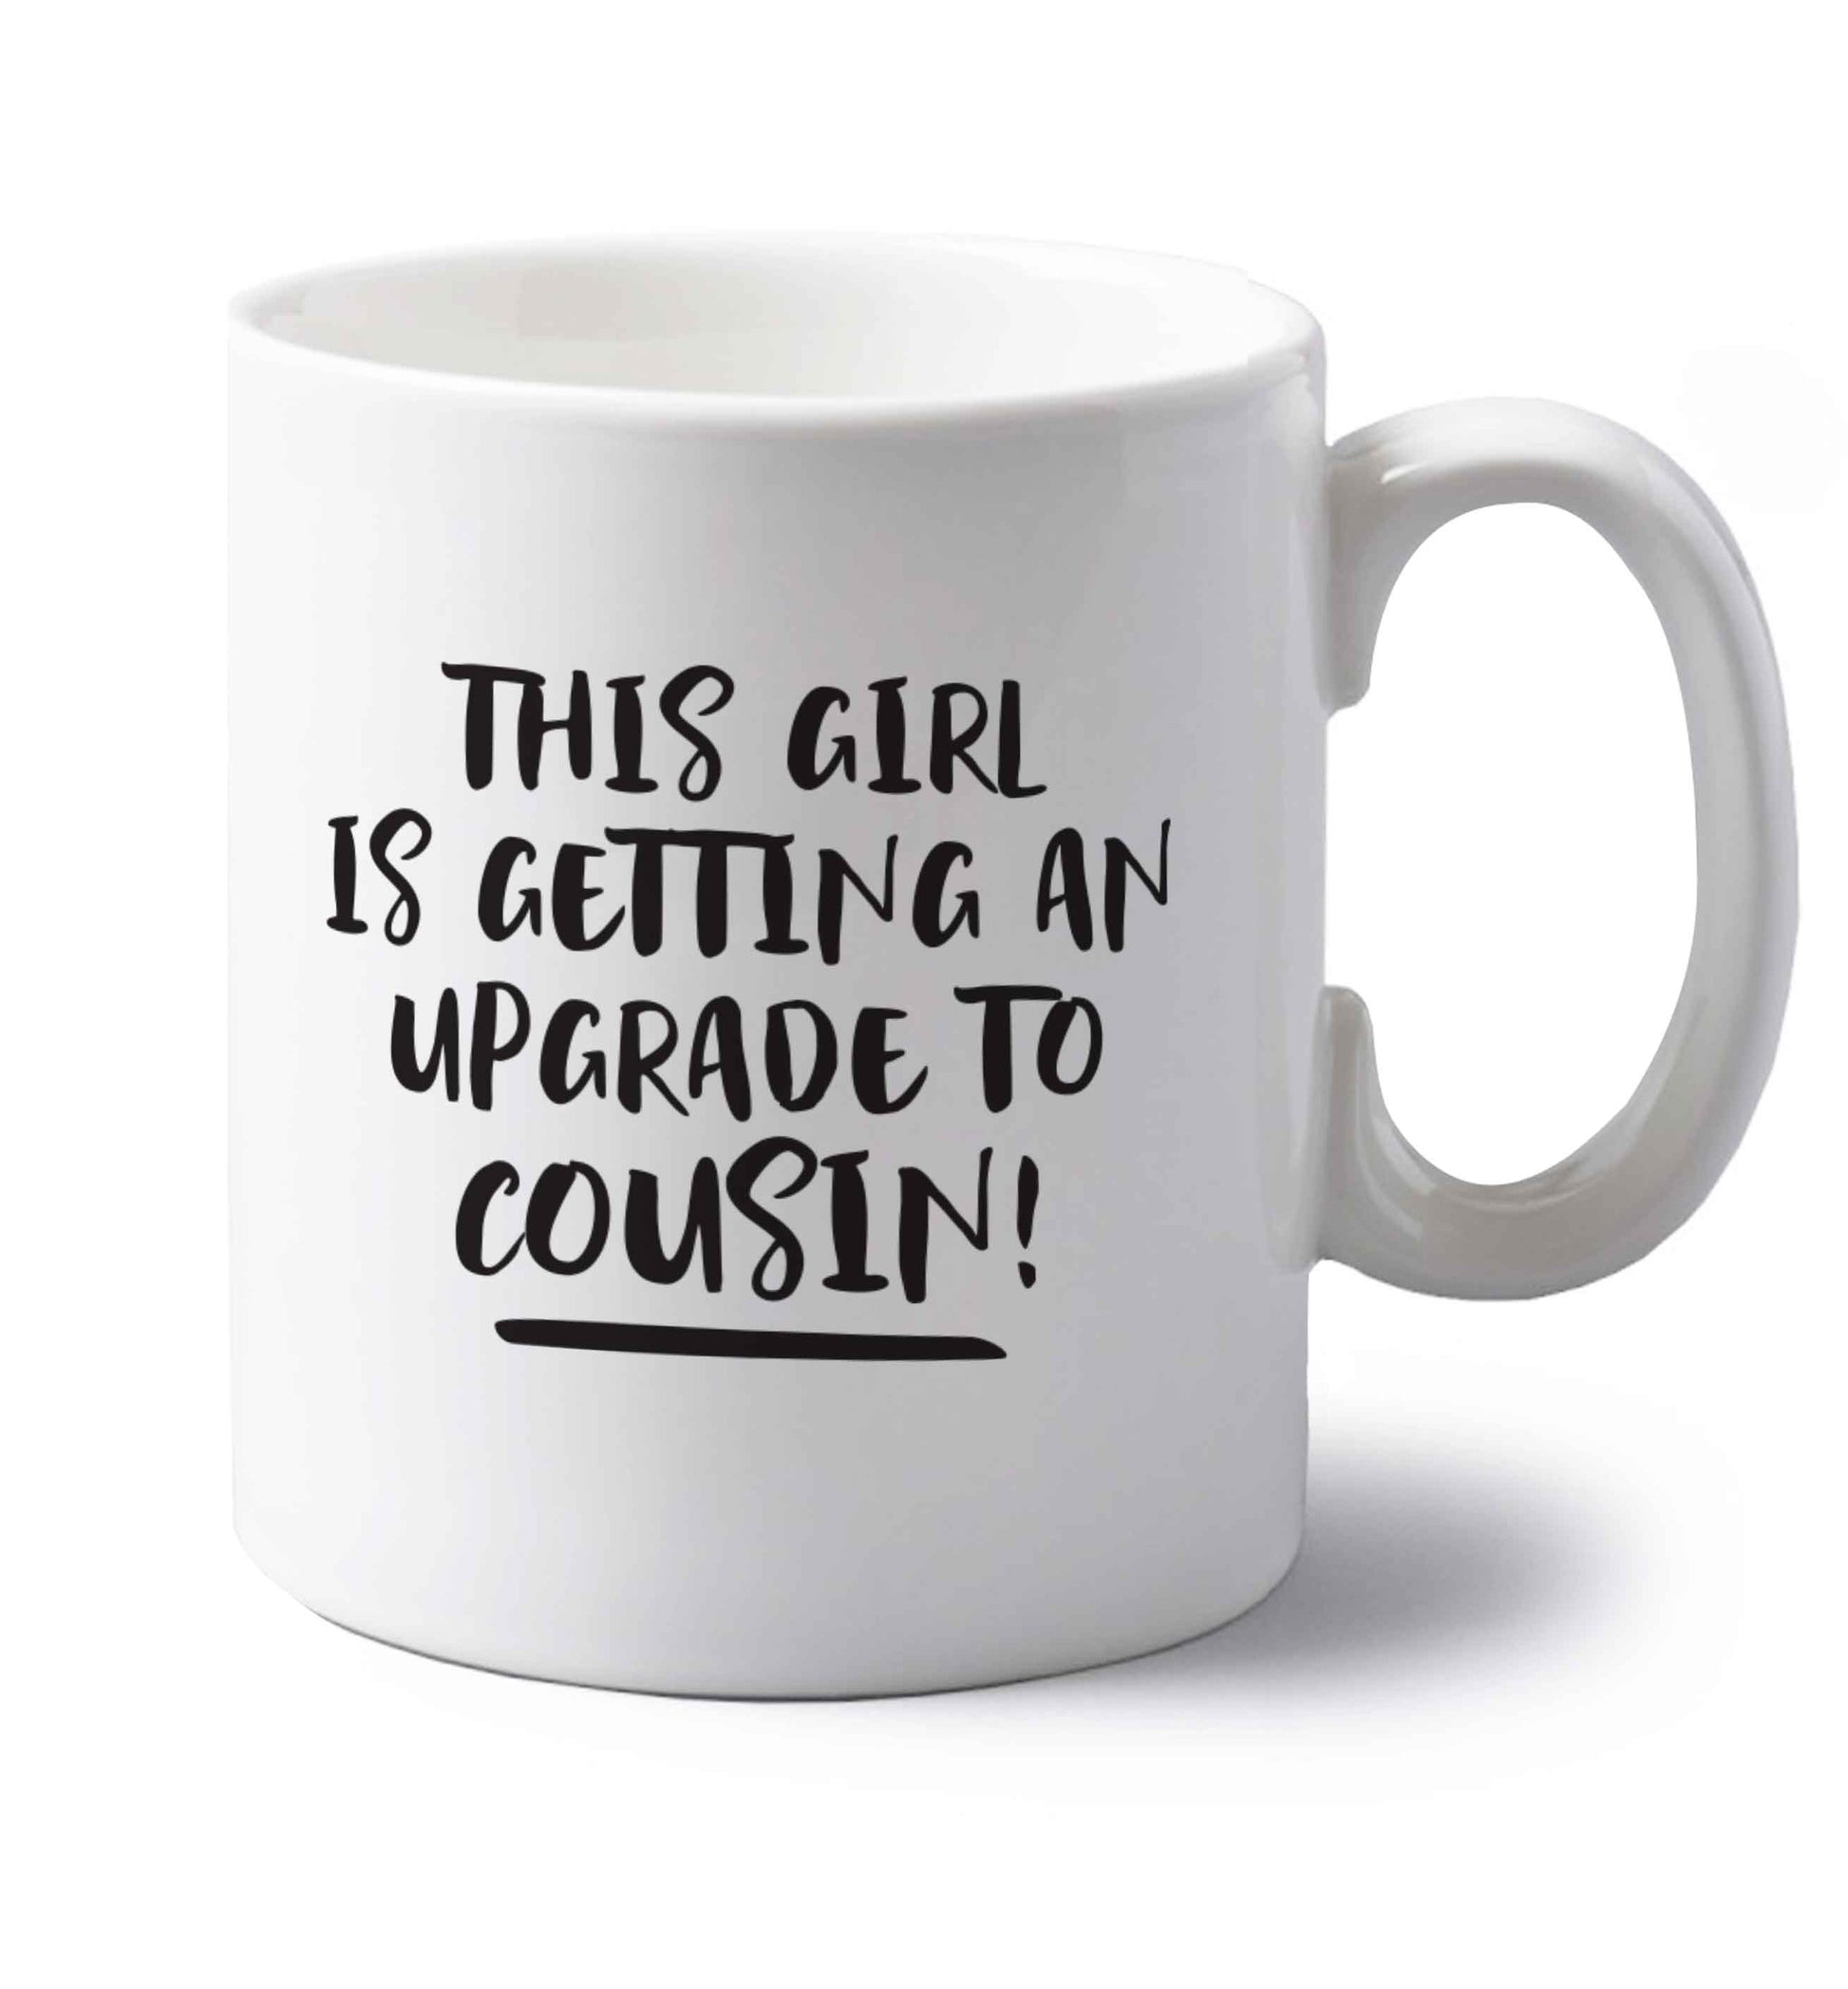 This girl is getting an upgrade to cousin! left handed white ceramic mug 